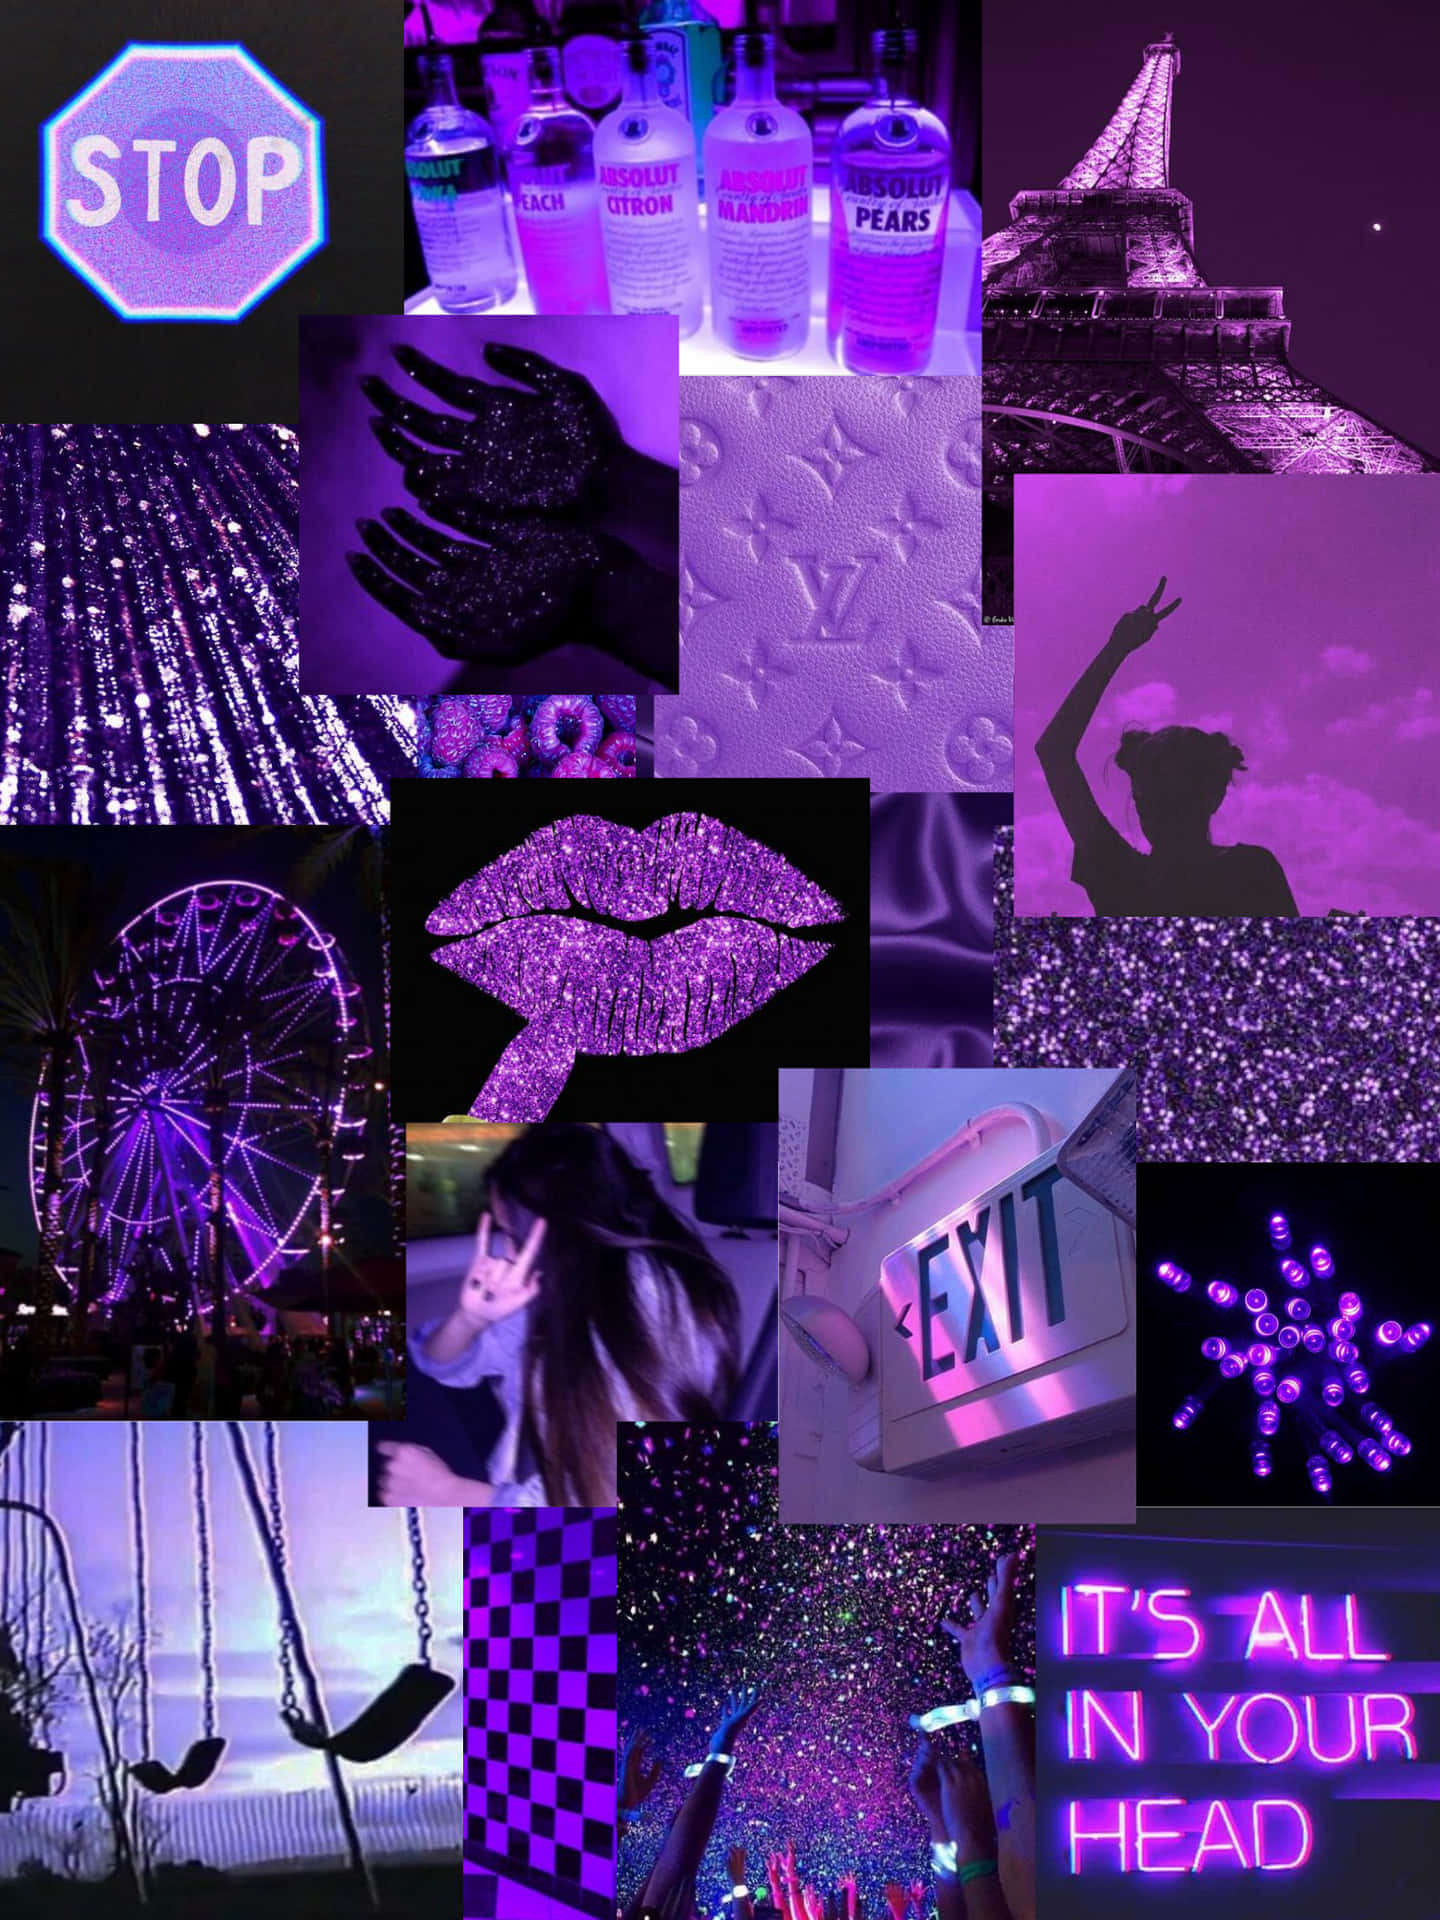 Purple Collage With Pictures Of People And A Stop Sign